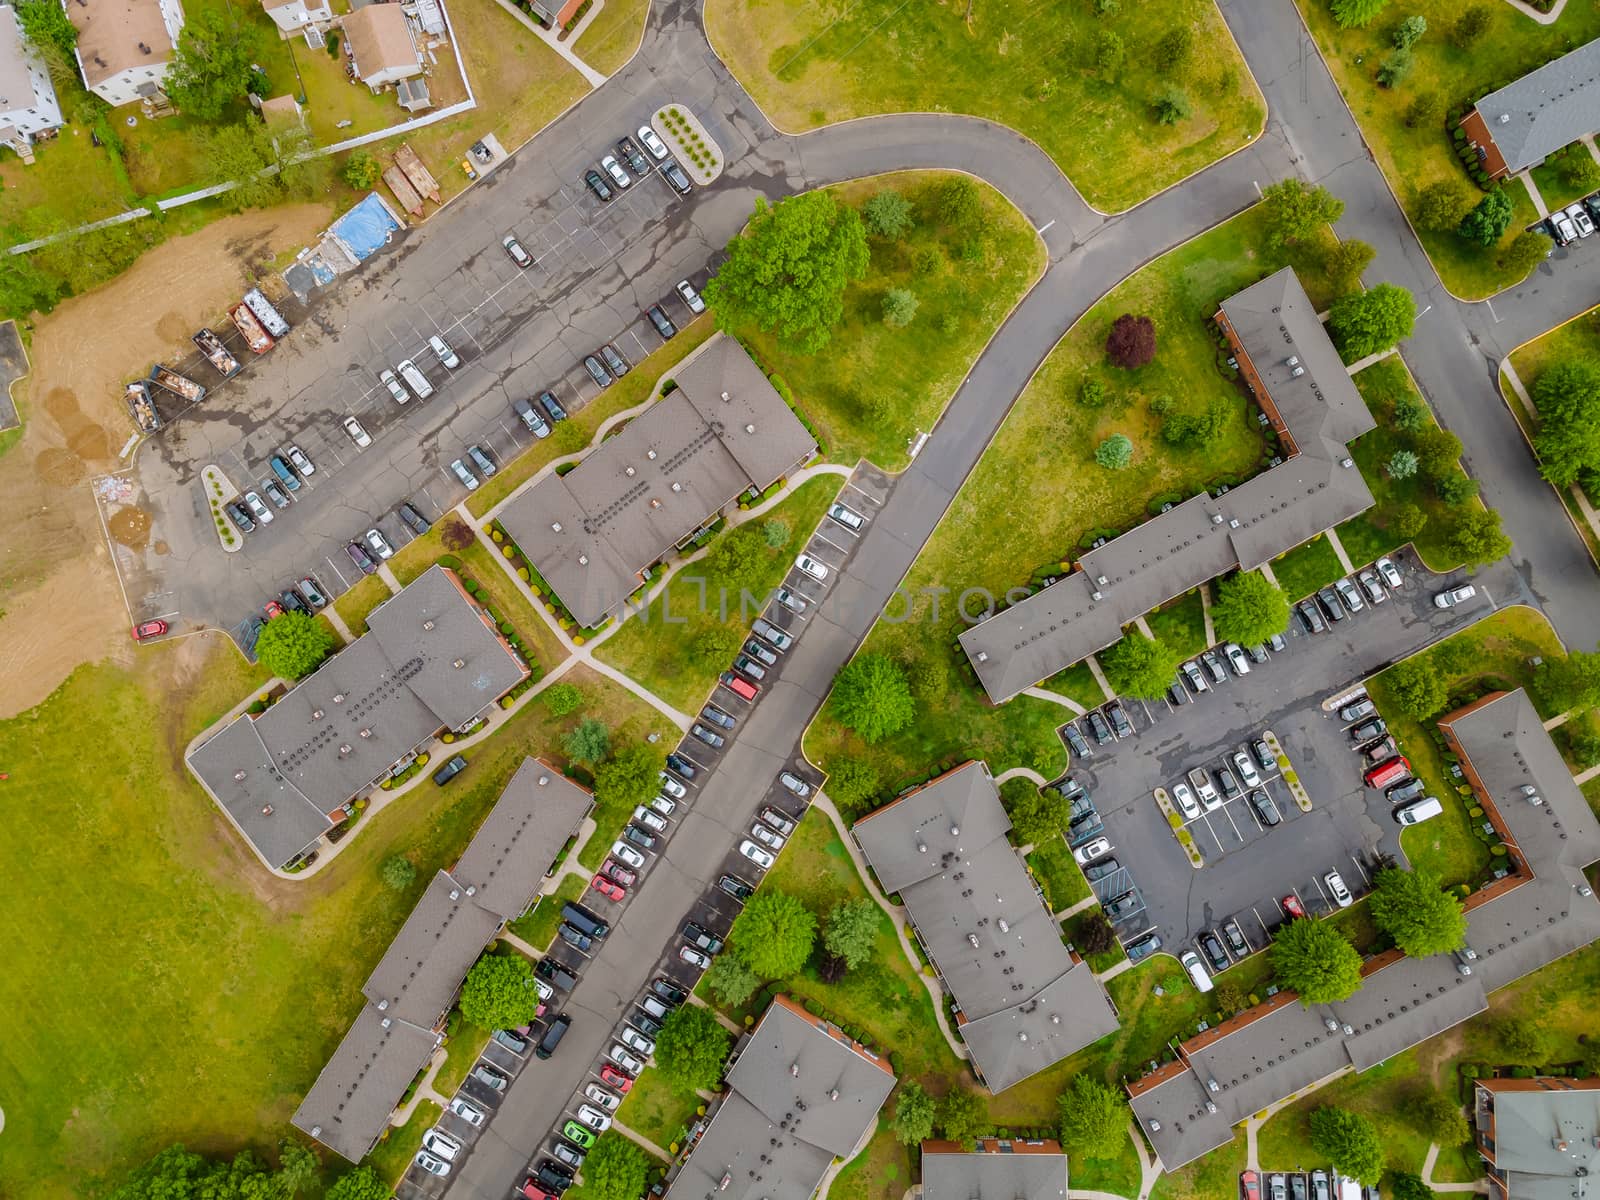 Overhead aerial view of the suburban area apartment district with cars parking lot stay home concept of self isolation during in the Covid19 coronavirus pandemic